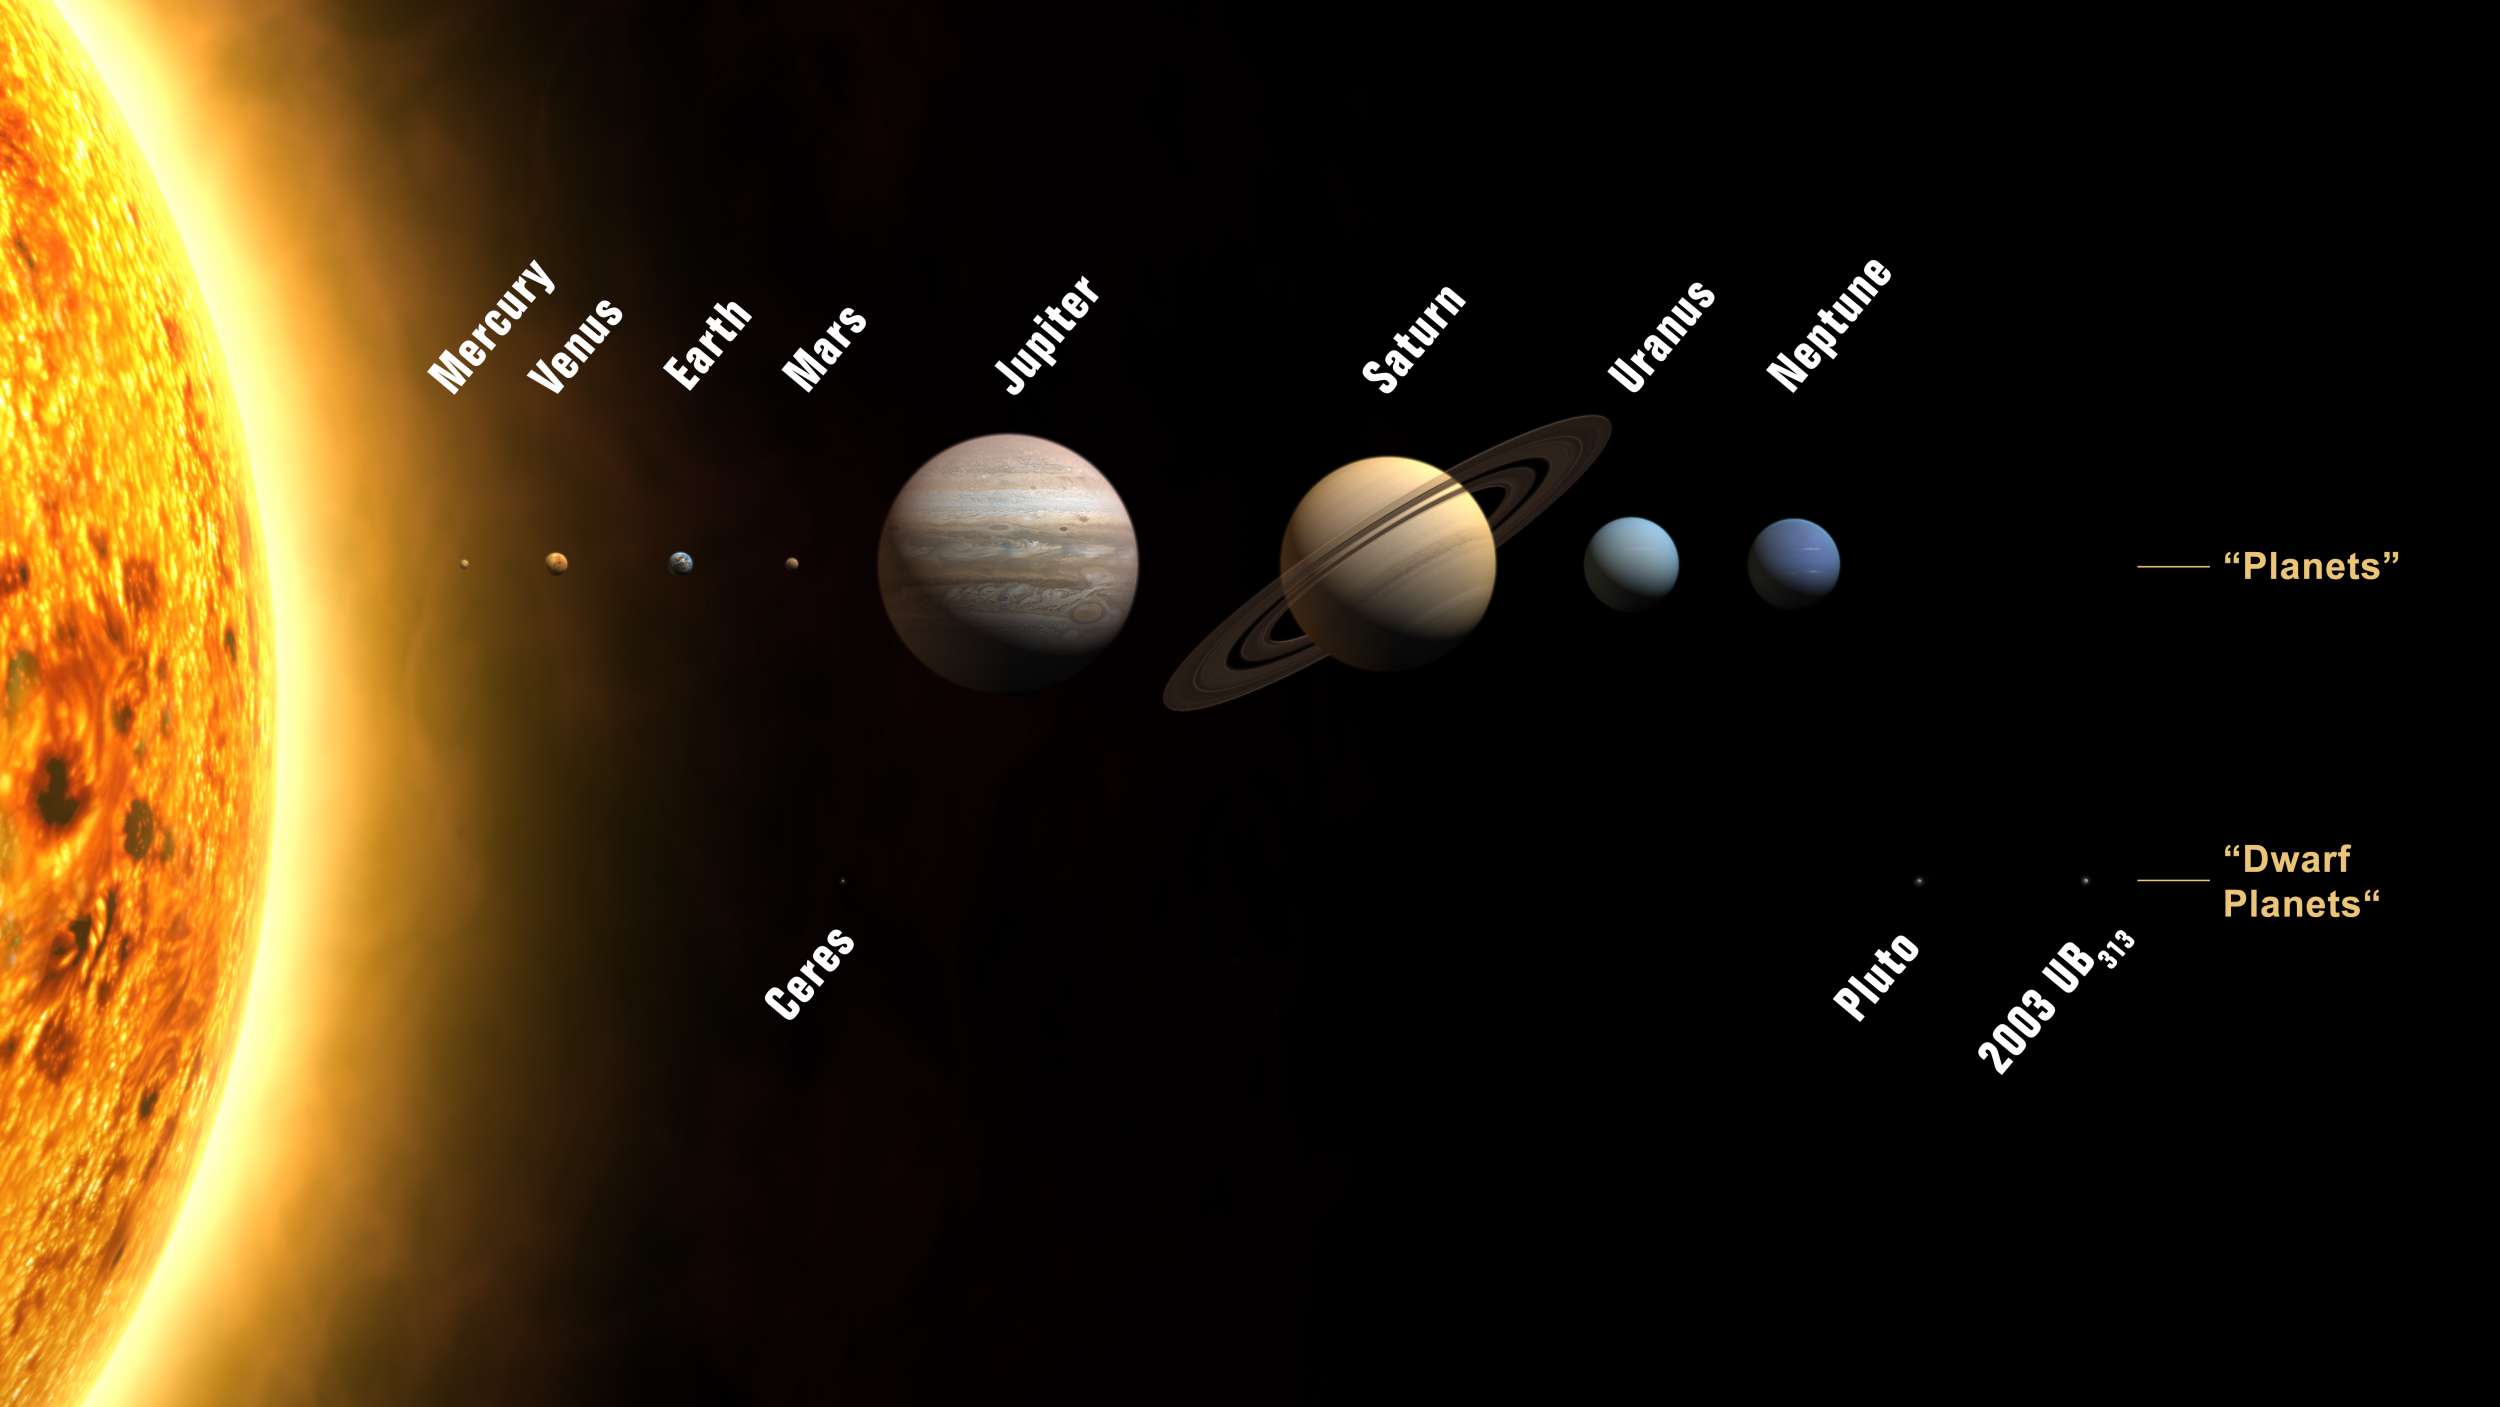 Solar System after 2006 IAU Congress; courtesy of Internationa Astronomical Union: 129 KB; clik on the image to enlarge (2500x1407 pixel)